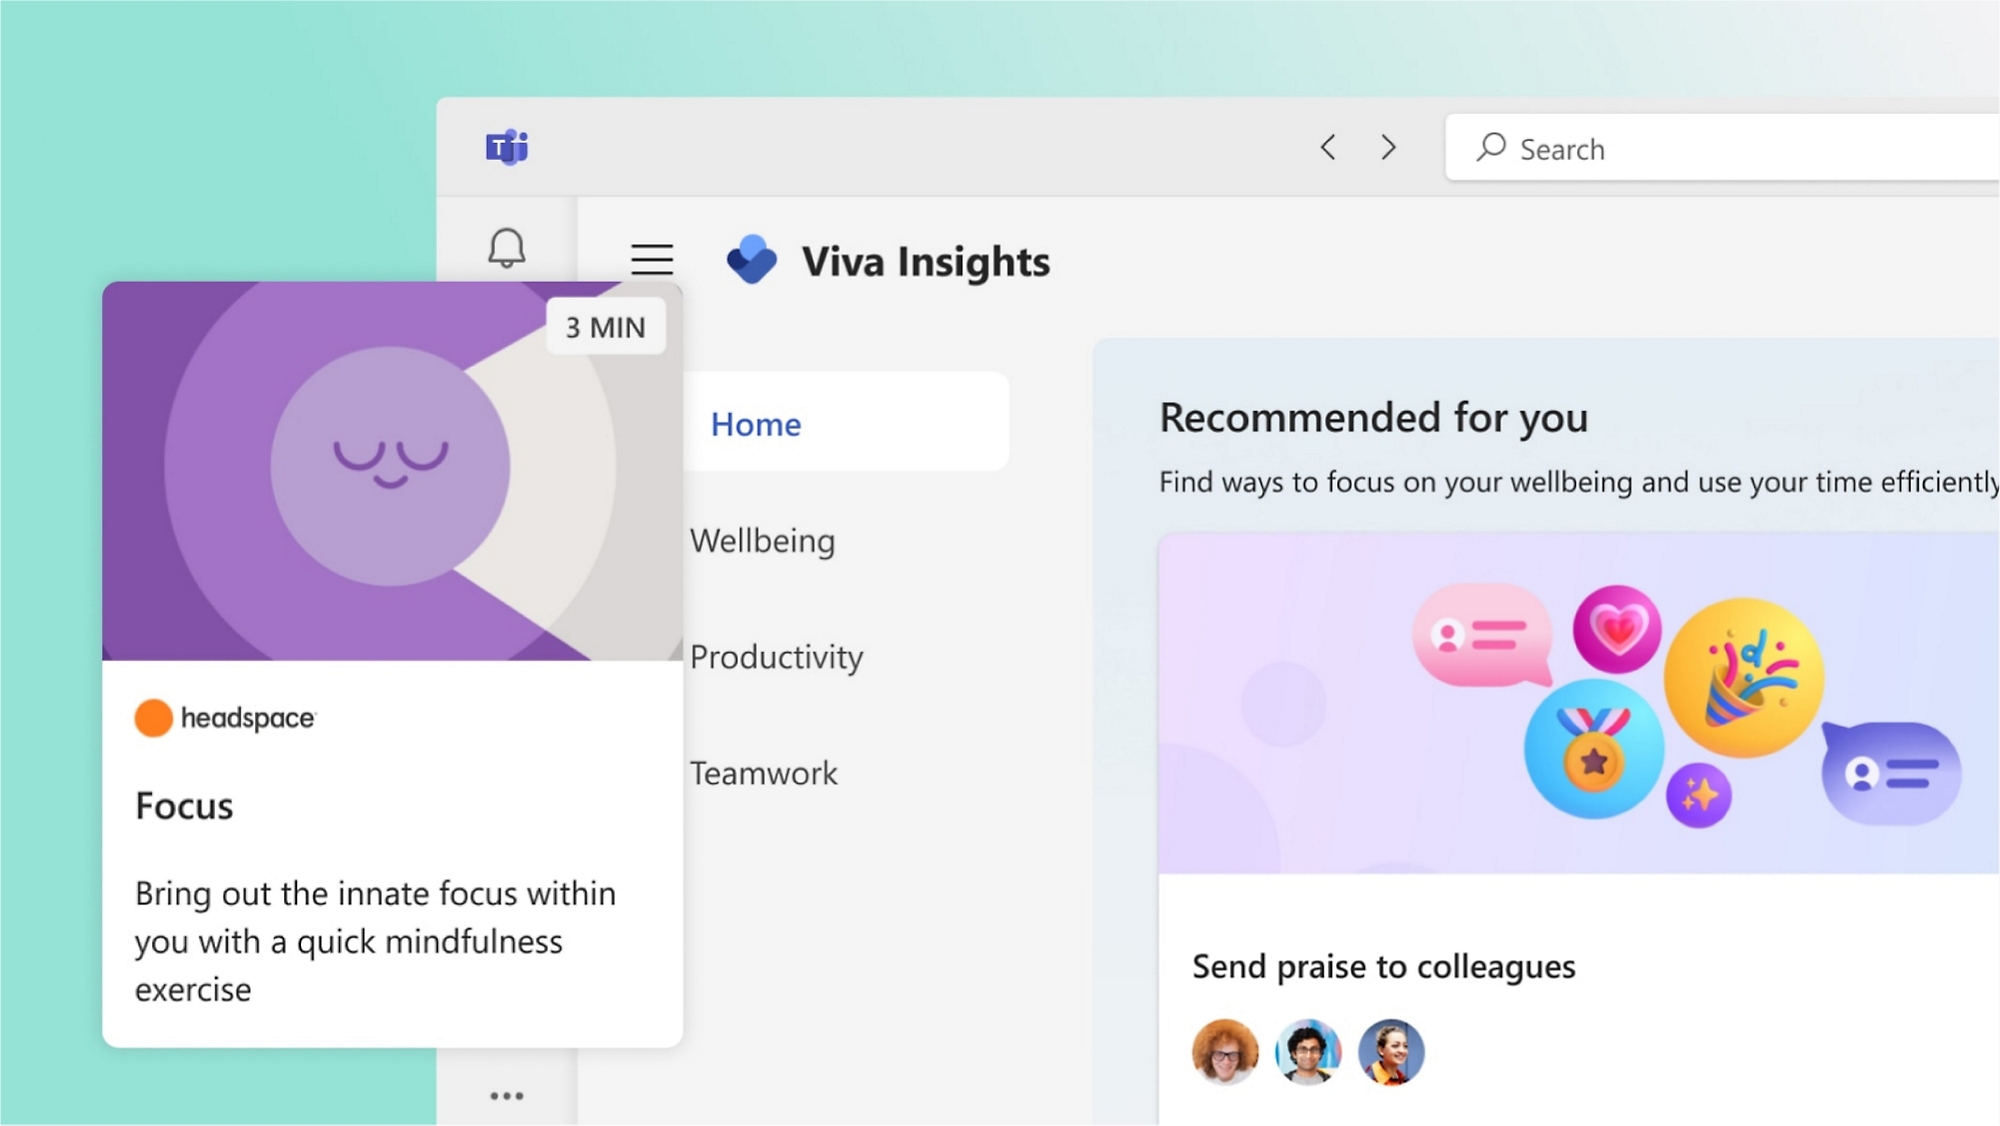  Viva Insights interface showing a recommendation for a 3-minute mindfulness exercise by Headspace and a section for sending praise to colleagues.